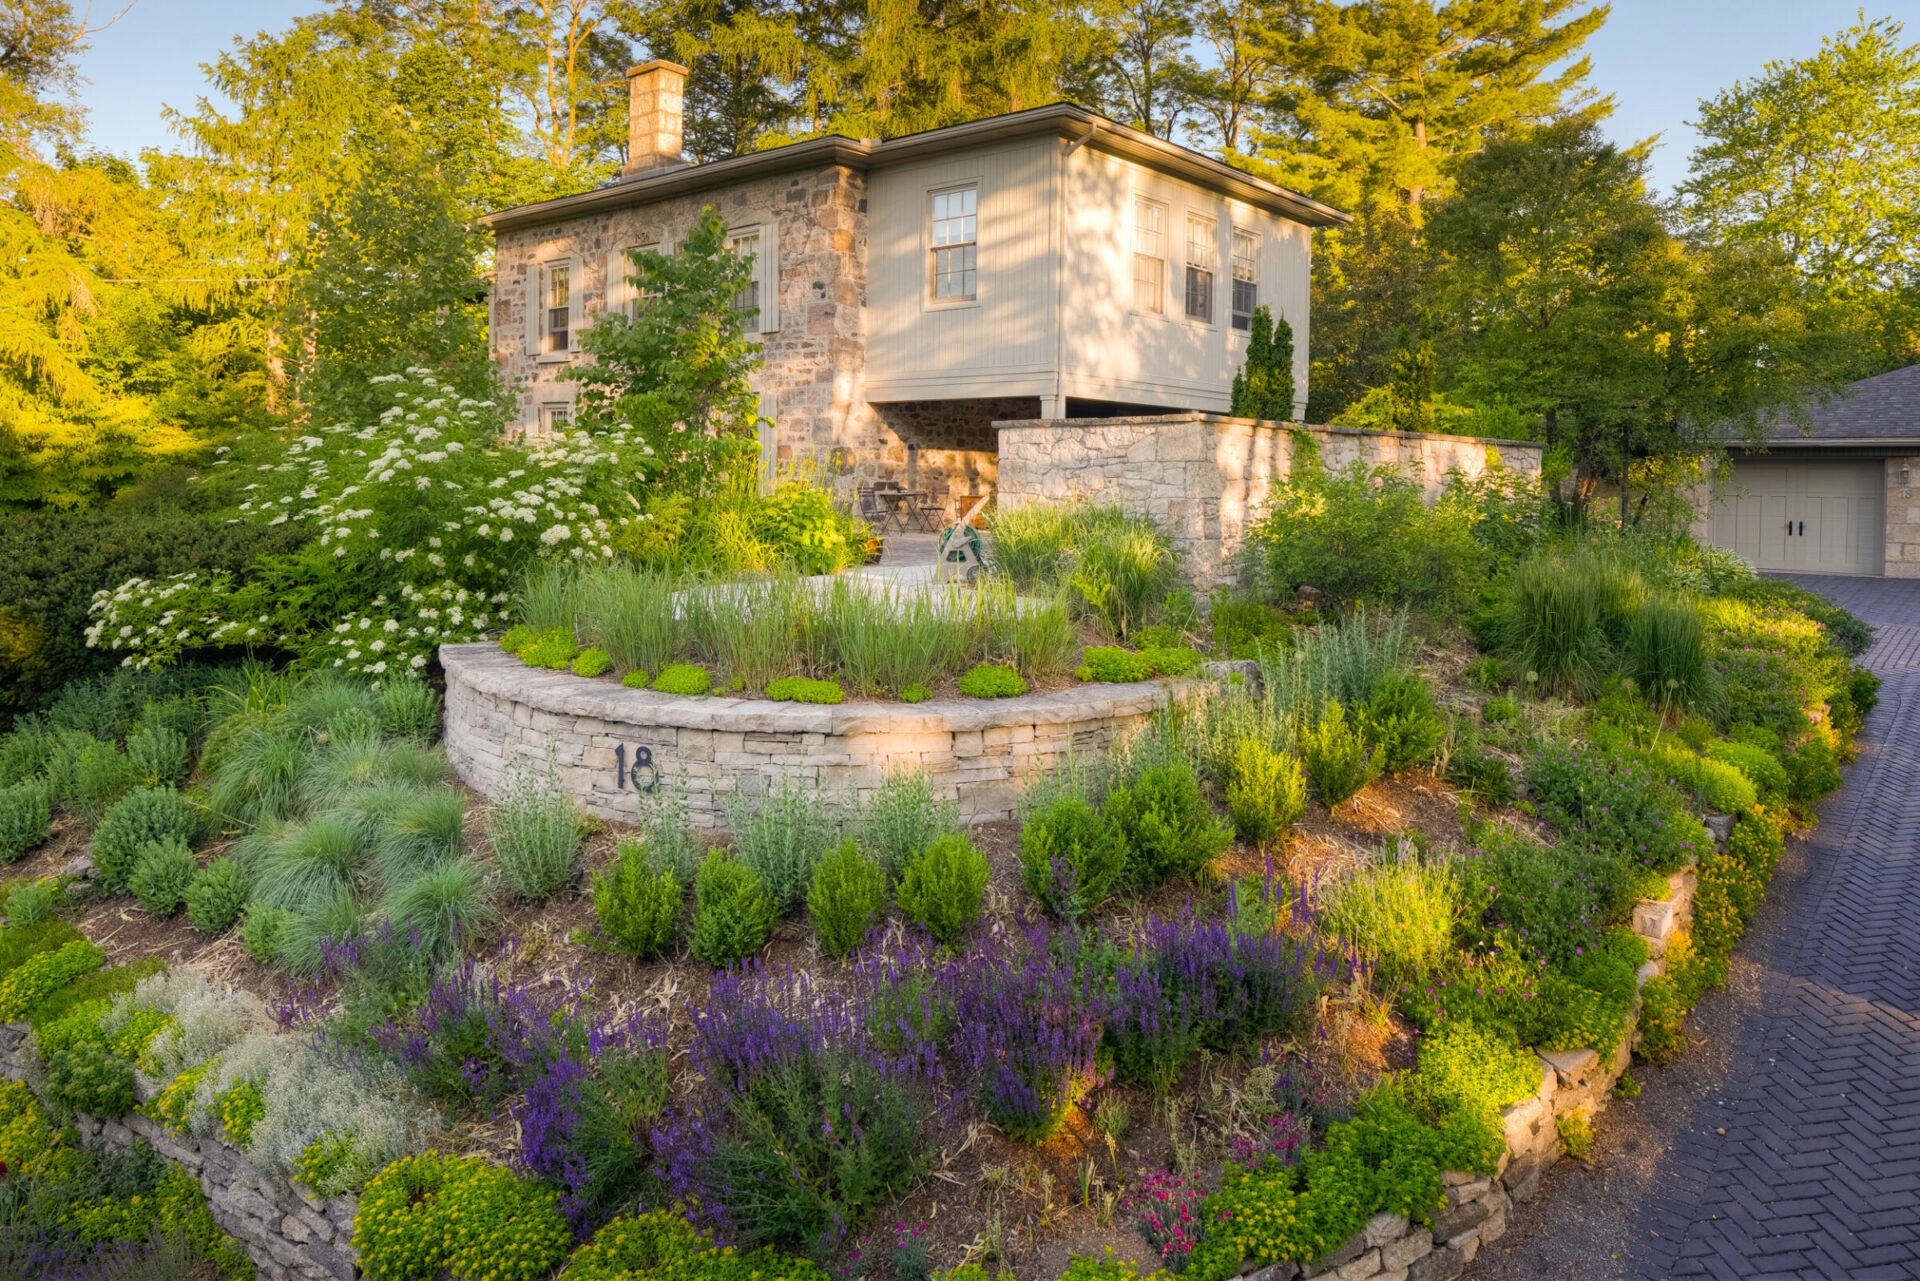 A stone house with a modern extension surrounded by lush, tiered landscaping under a warm sunset light. Cobblestone driveway leads to a garage.